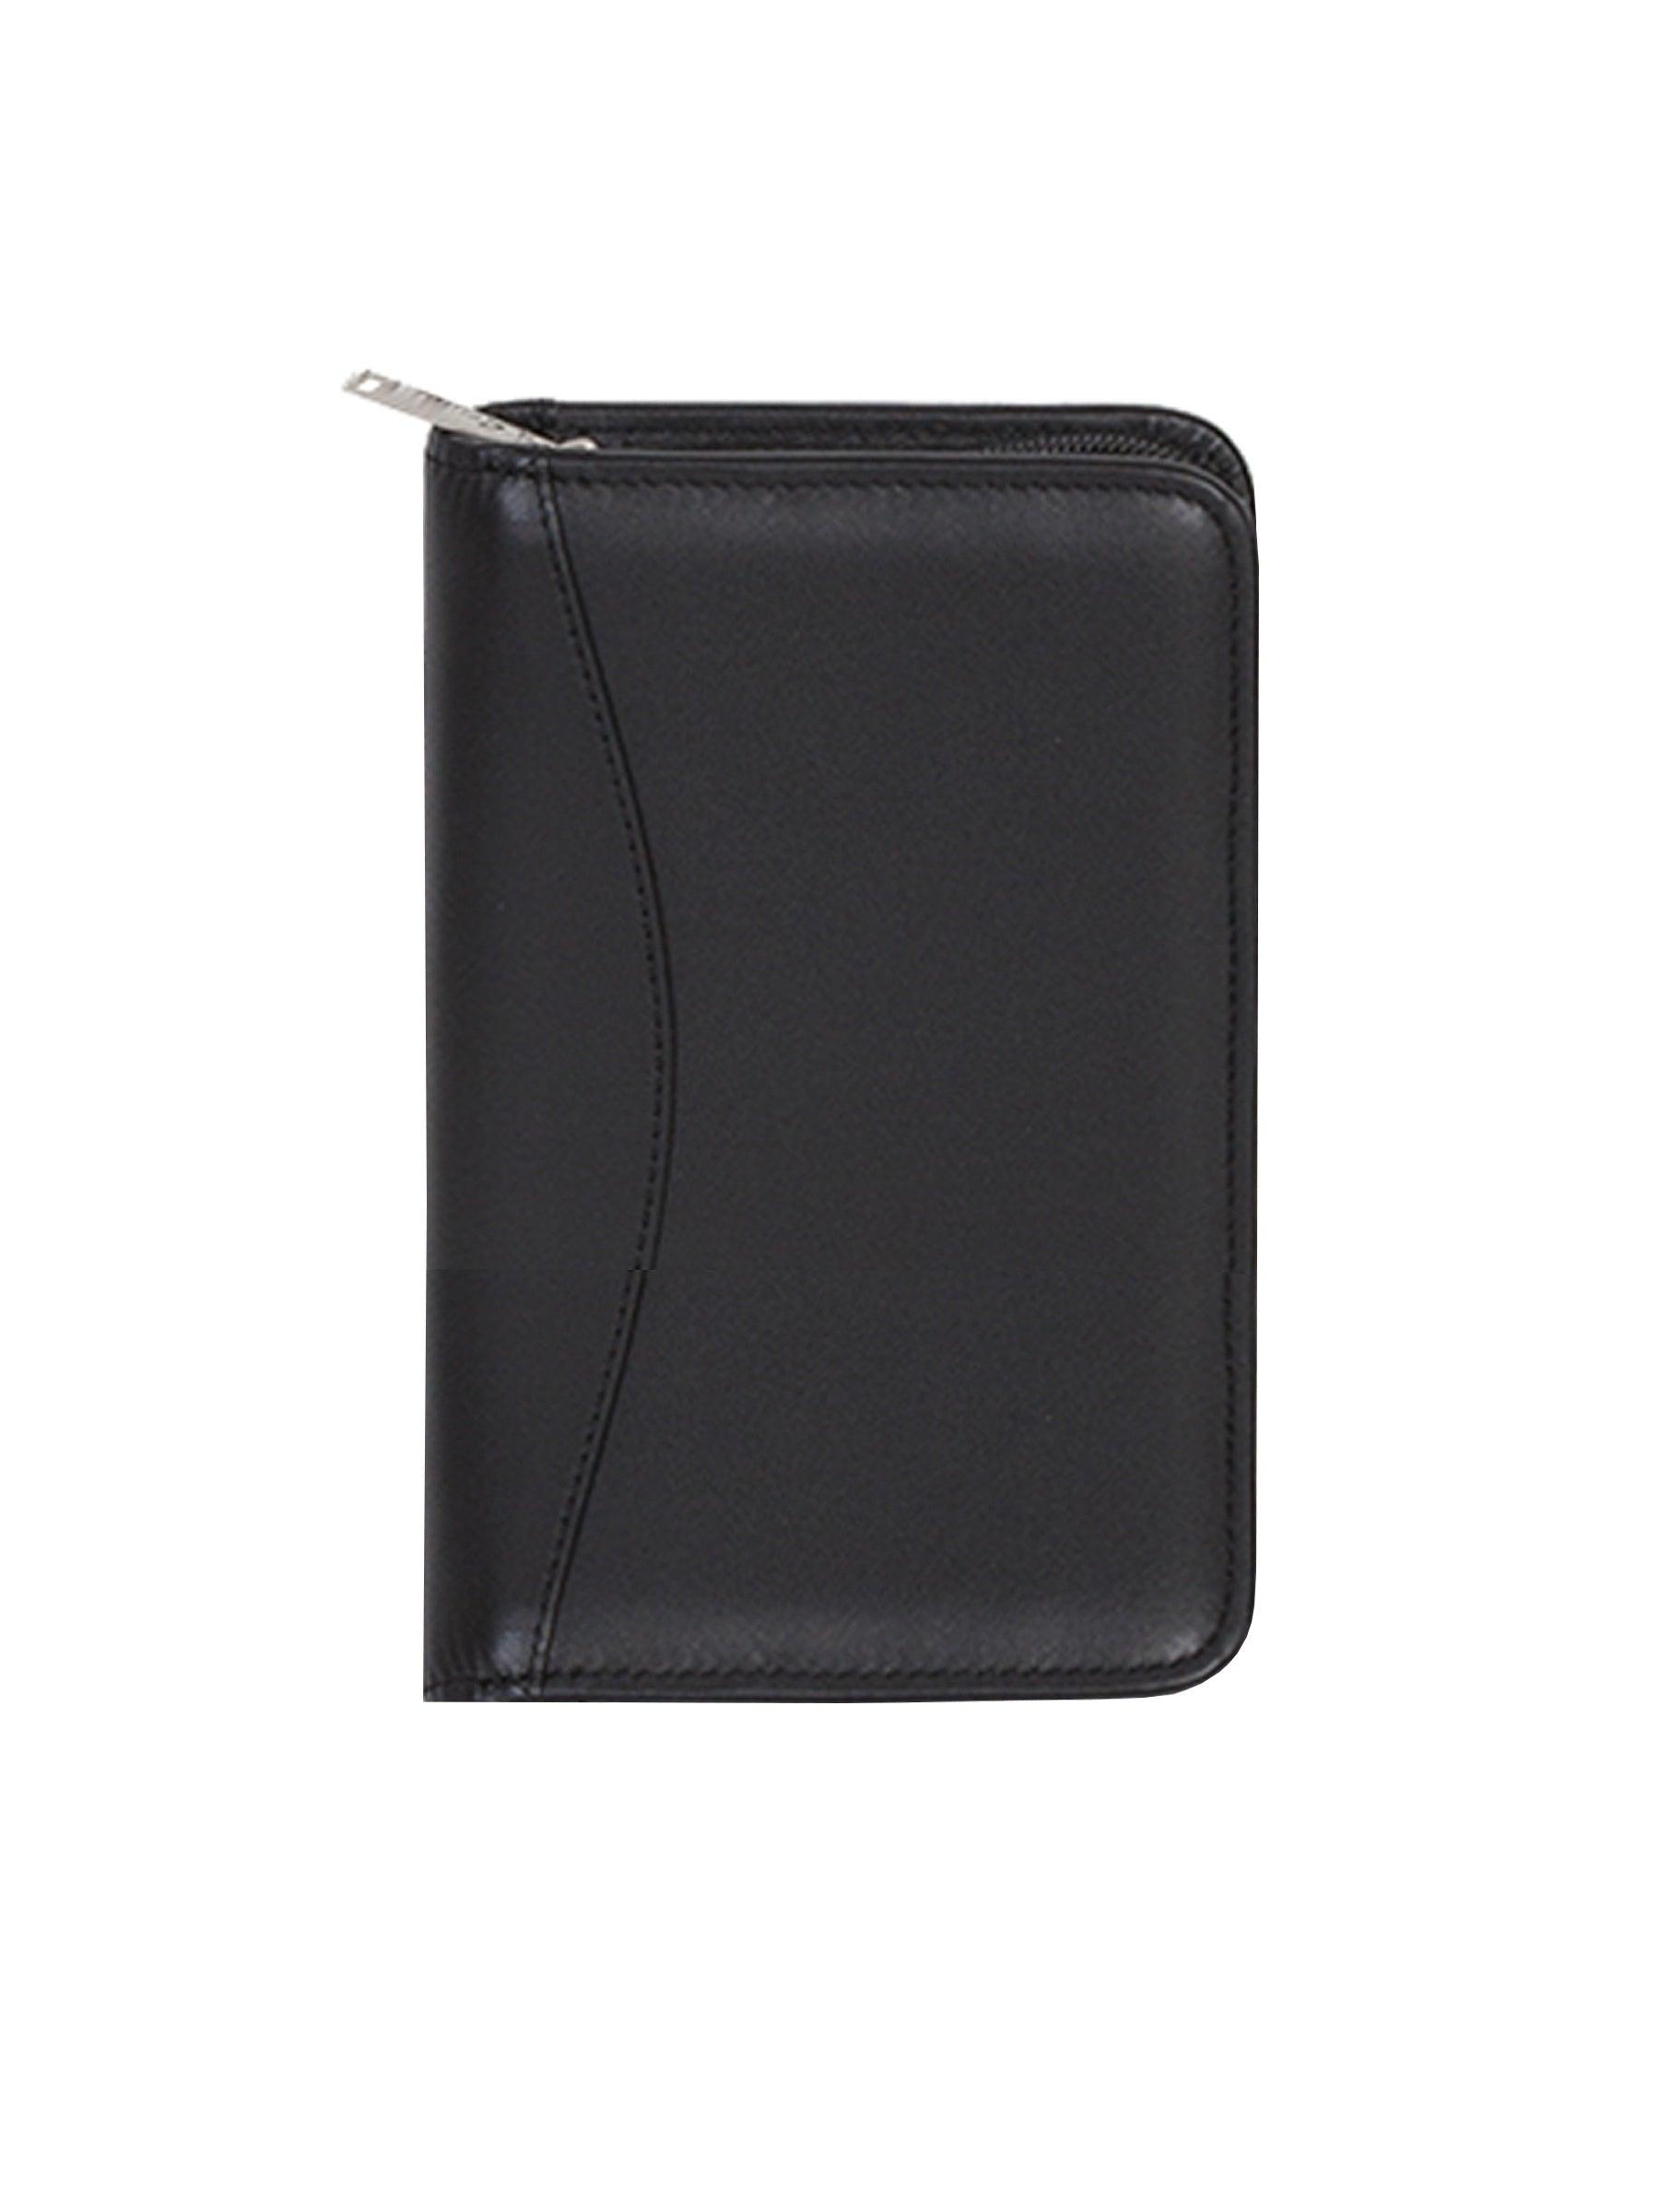 Scully Leather zip pocket planner - Flyclothing LLC